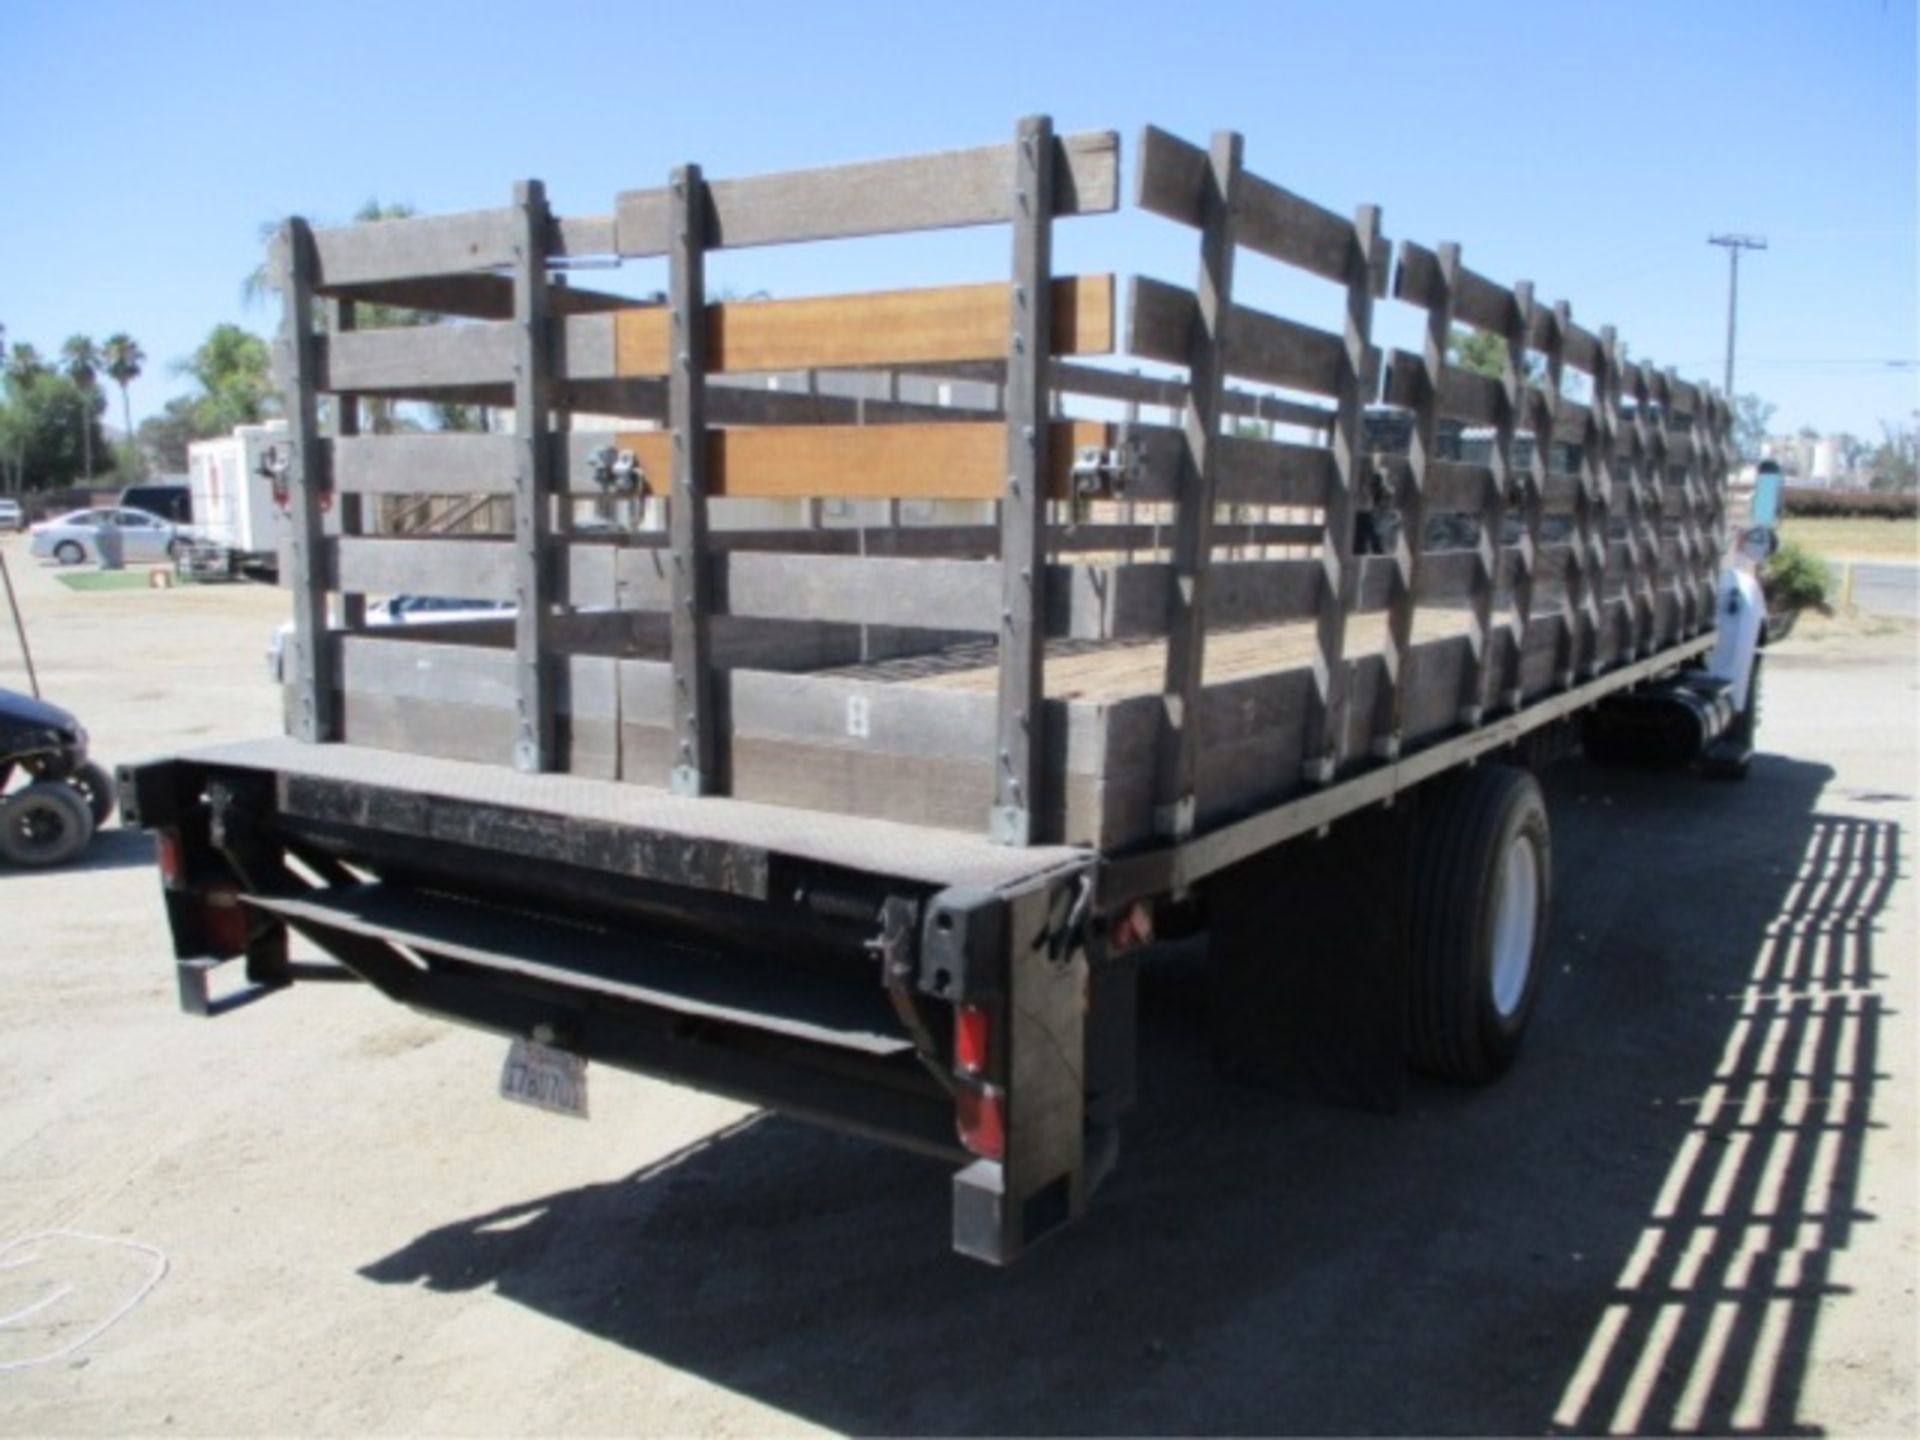 2005 Ford F650 S/A Flatbed Stakebed Truck, Cat C7 Acert 7.2L 6-Cyl Diesel, Automatic, Lift Gate, 24' - Image 15 of 61